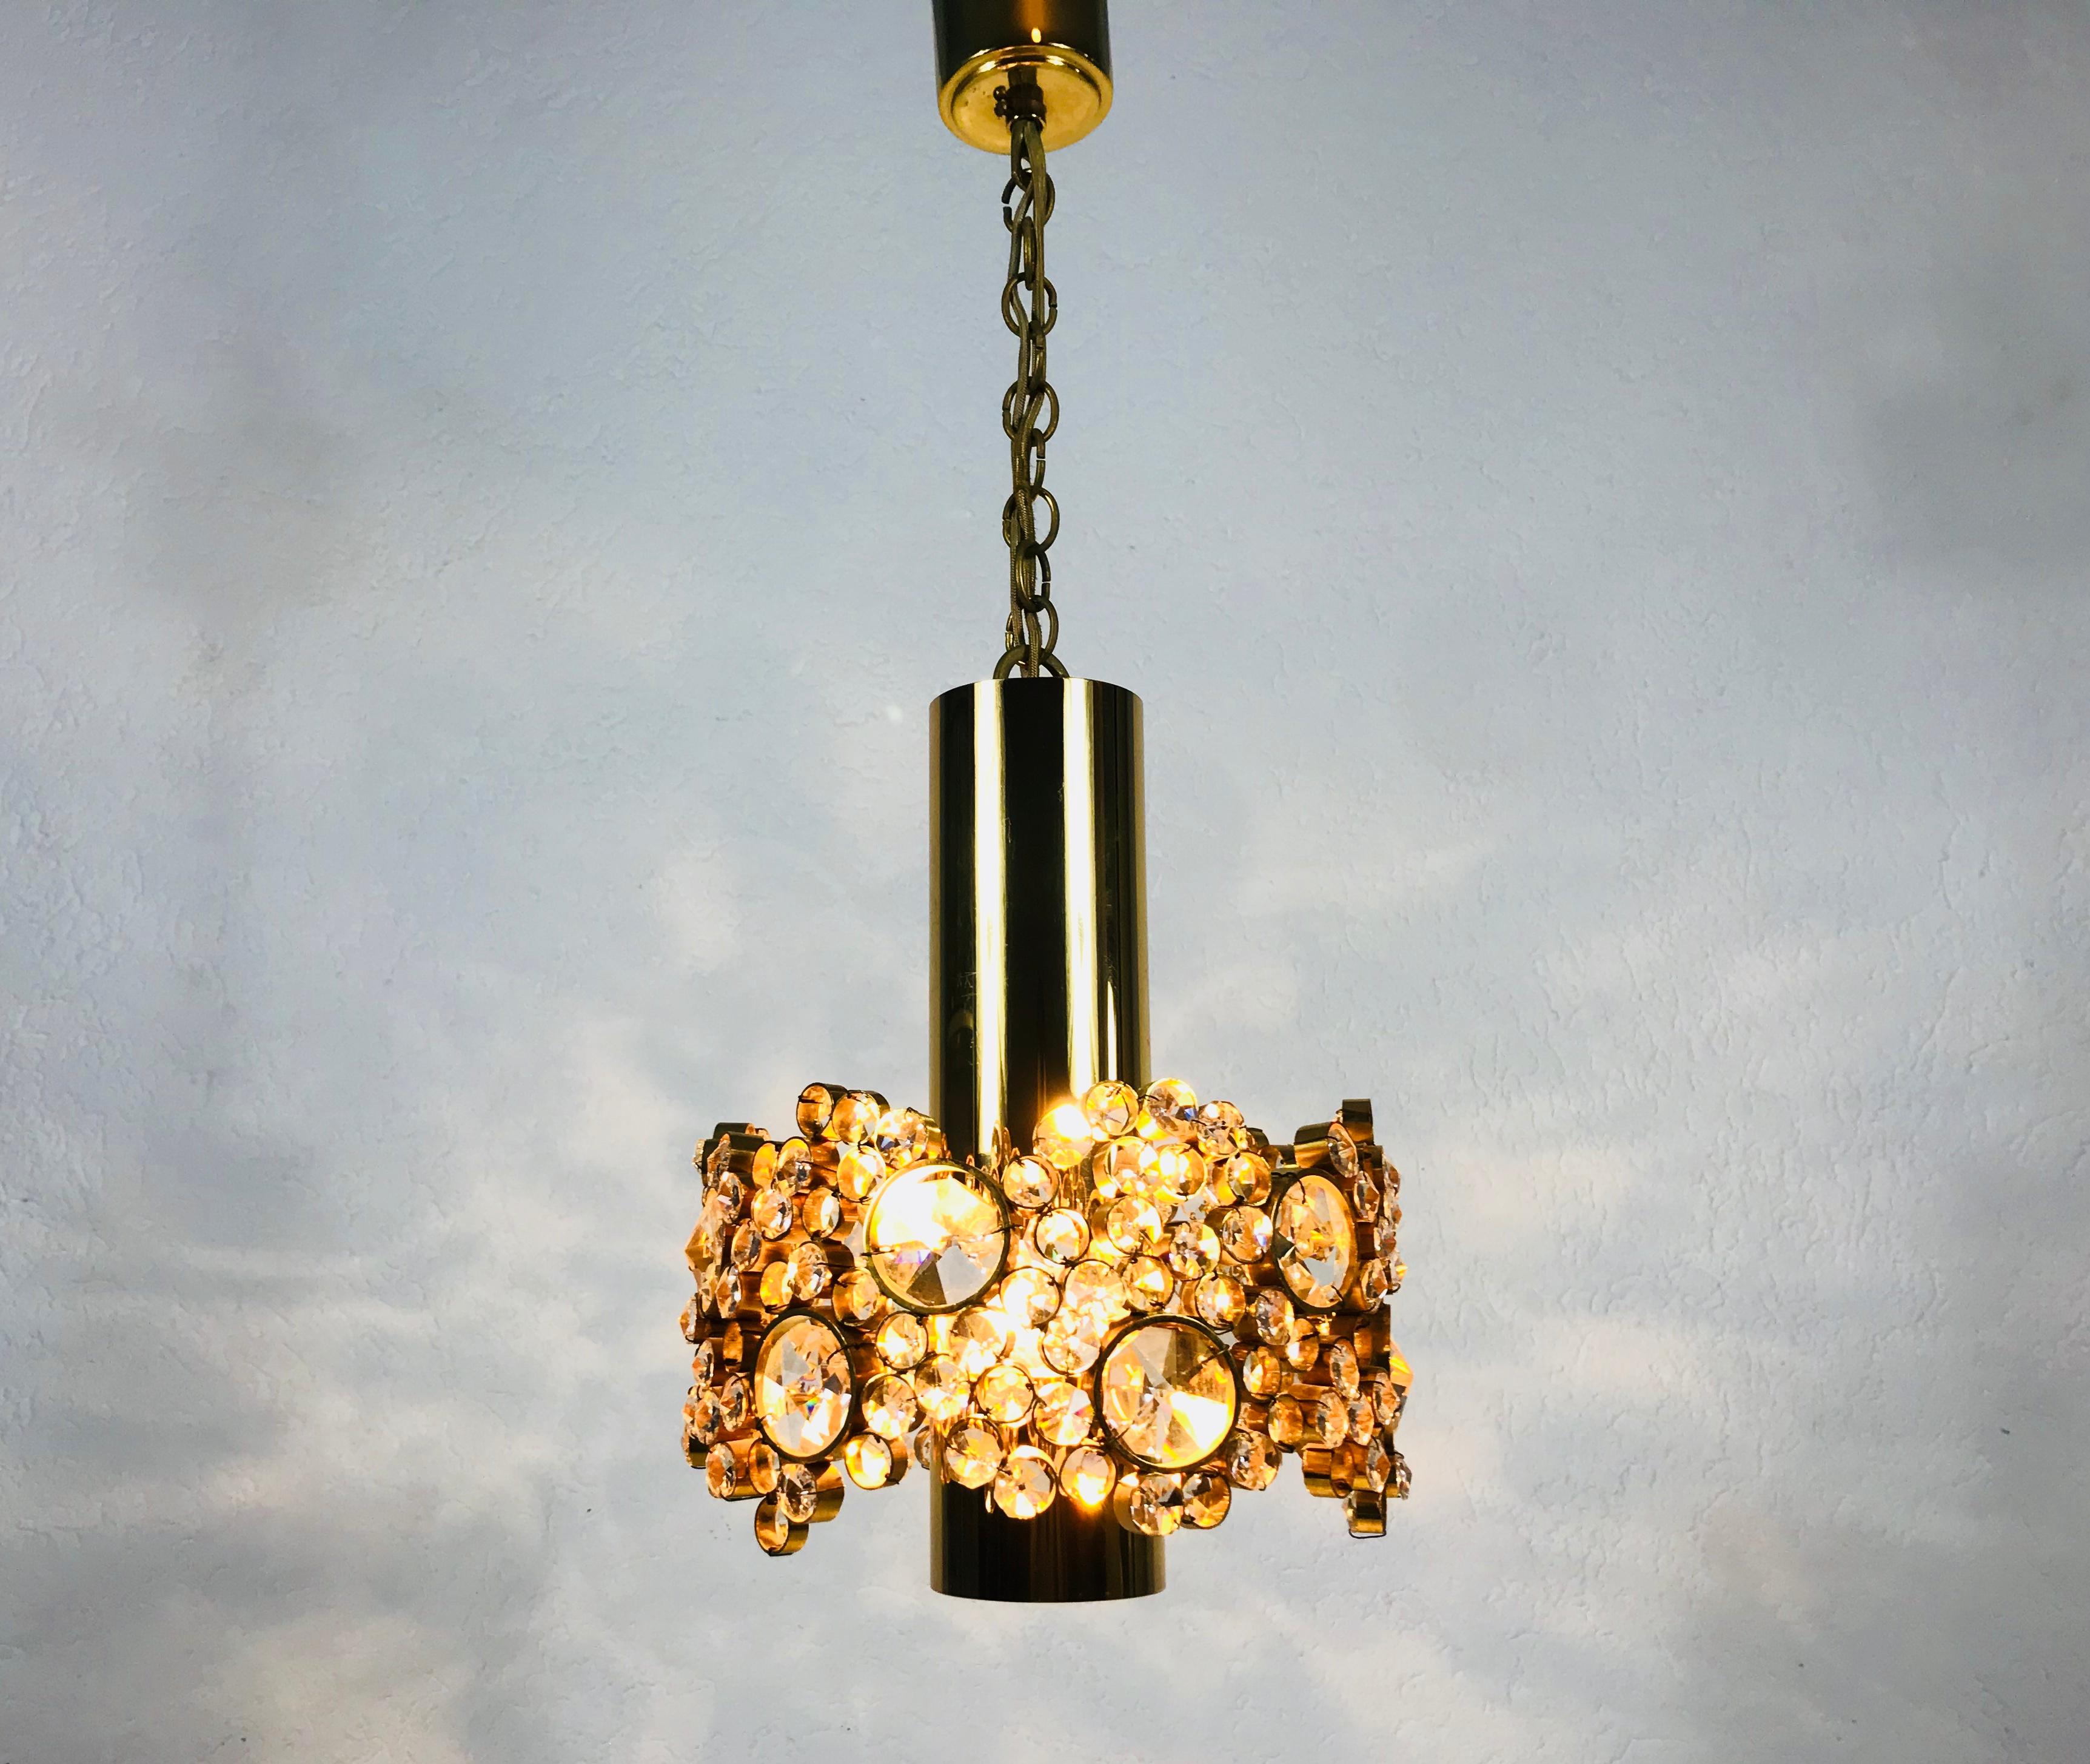 Pair of Gilt Brass and Crystal Glass Chandeliers by Palwa, Germany, 1970s For Sale 5